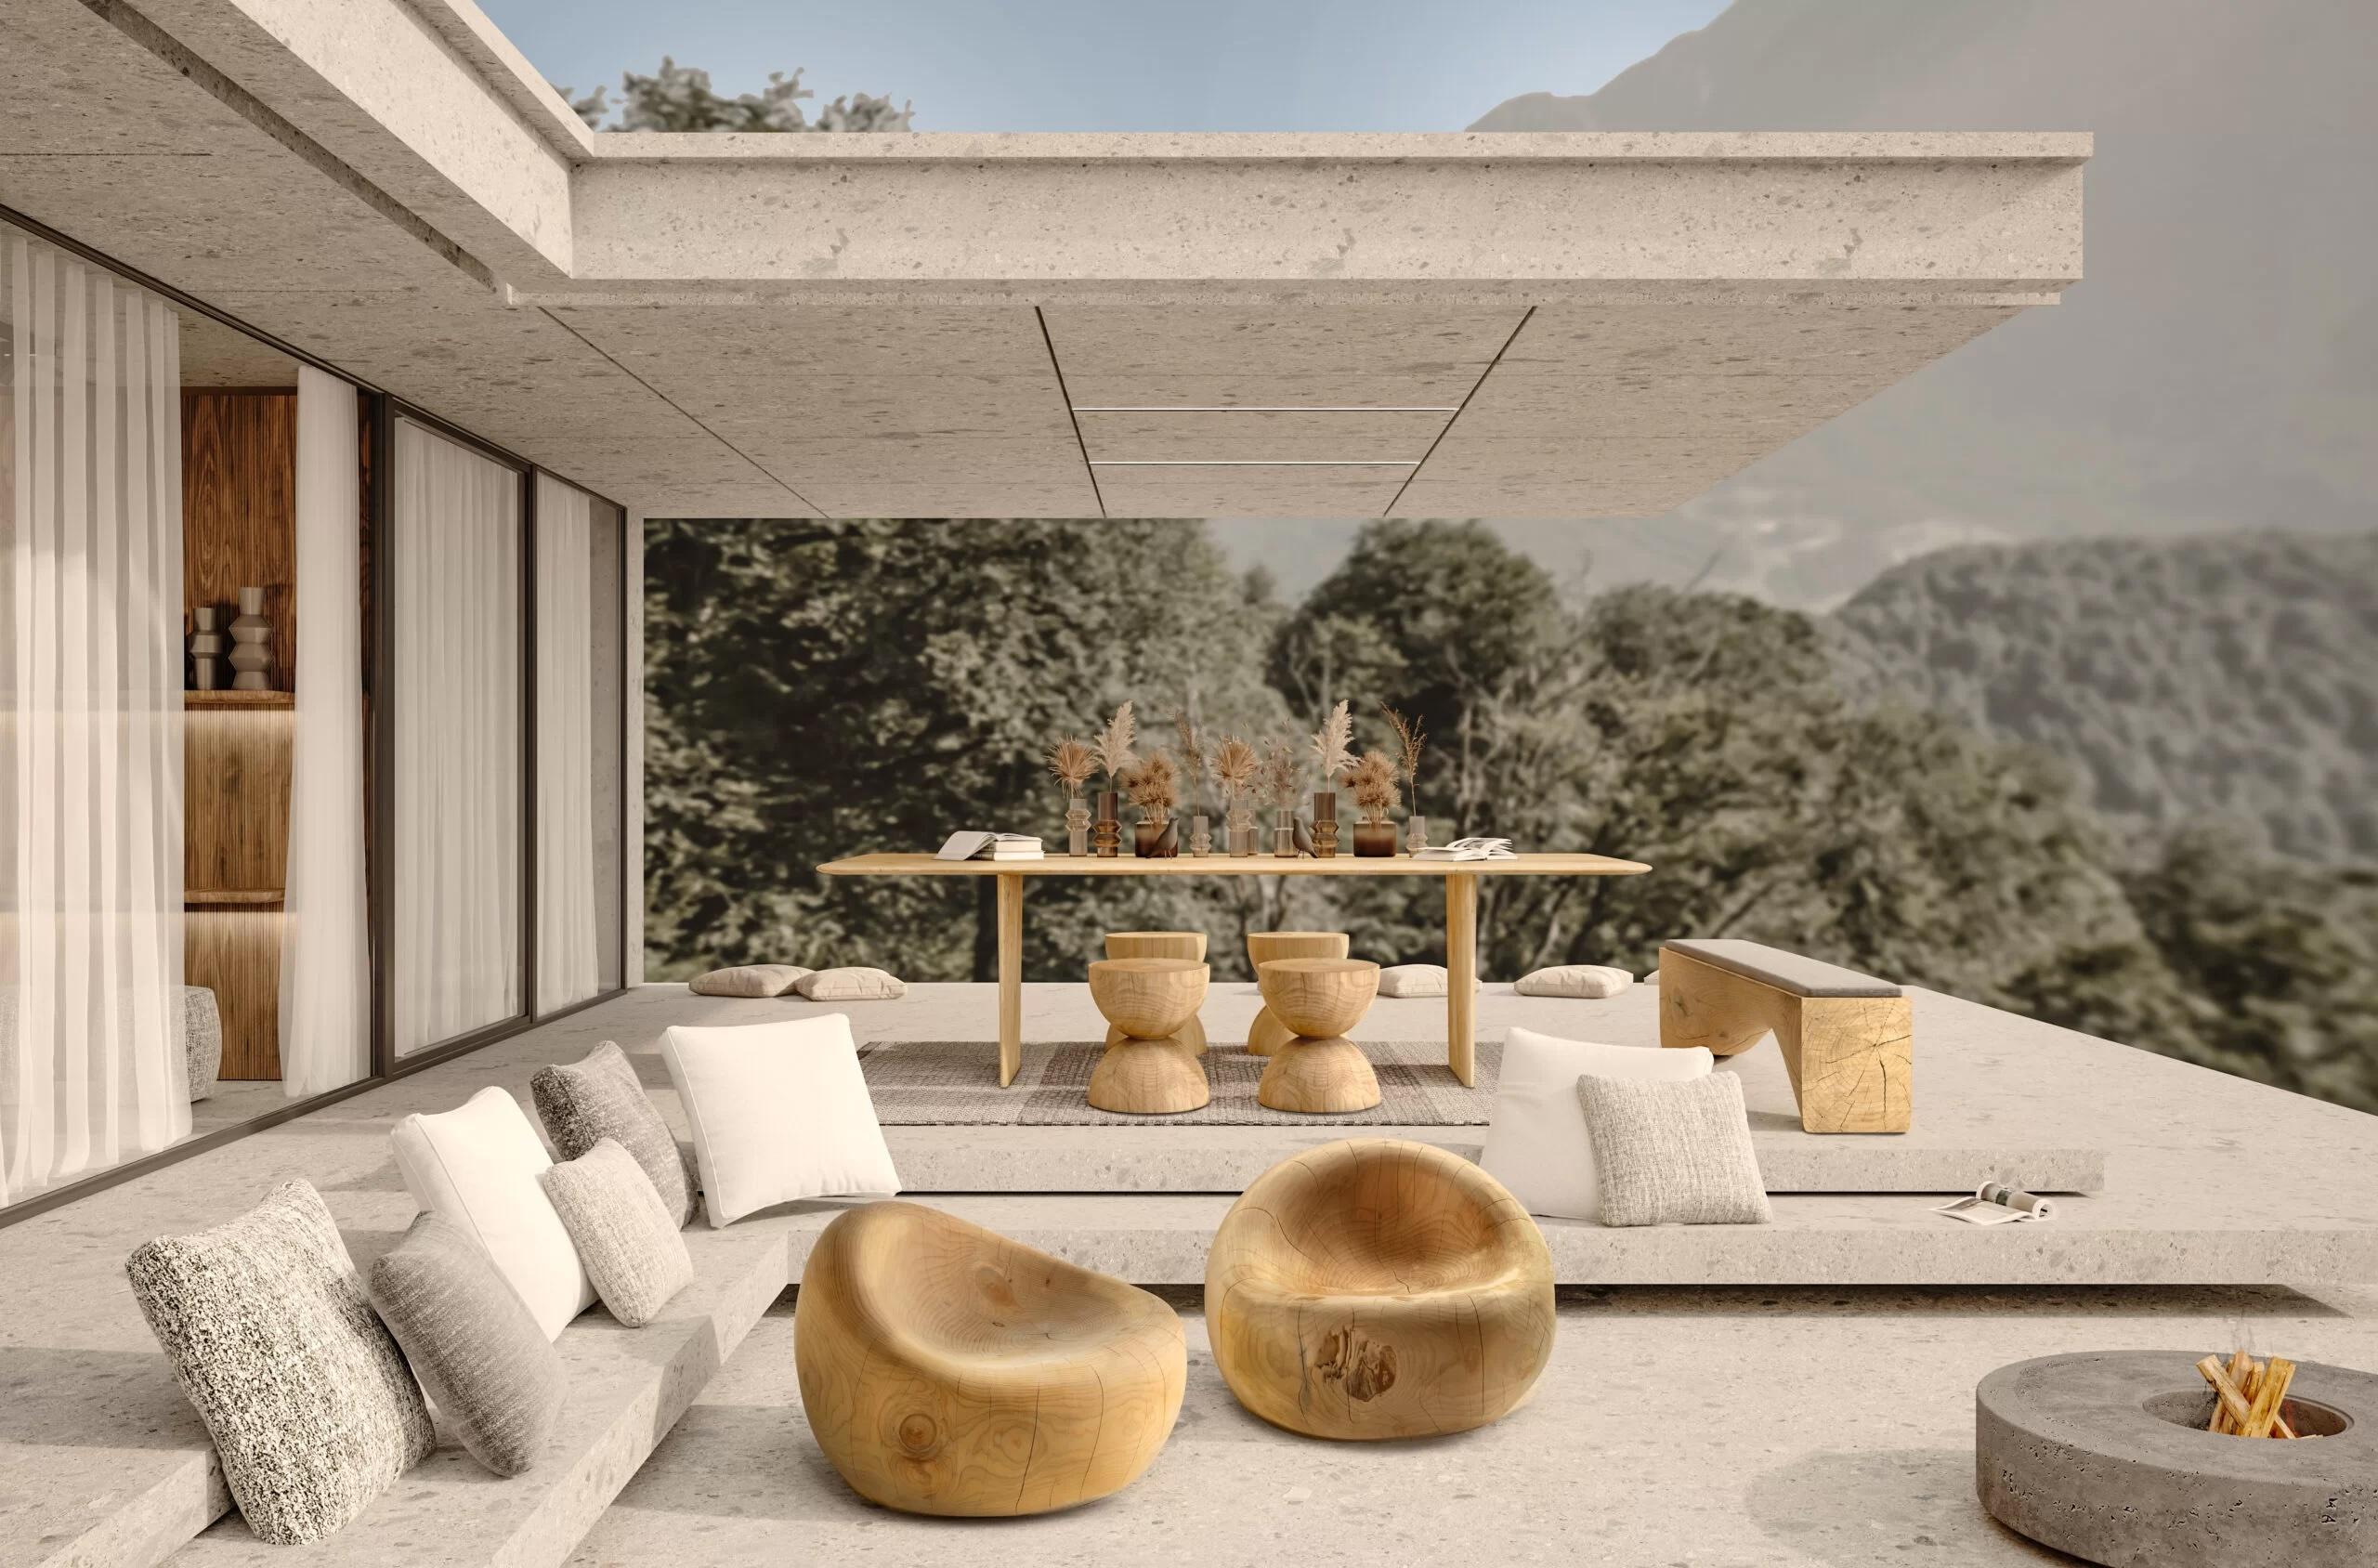 Enjoy being in touch with nature in the comfort of your own home, turning evey outdoor area in a space to gaze at with fresh eyes.

Available in a variety of sizes. Please enquire within. Made in Italy.